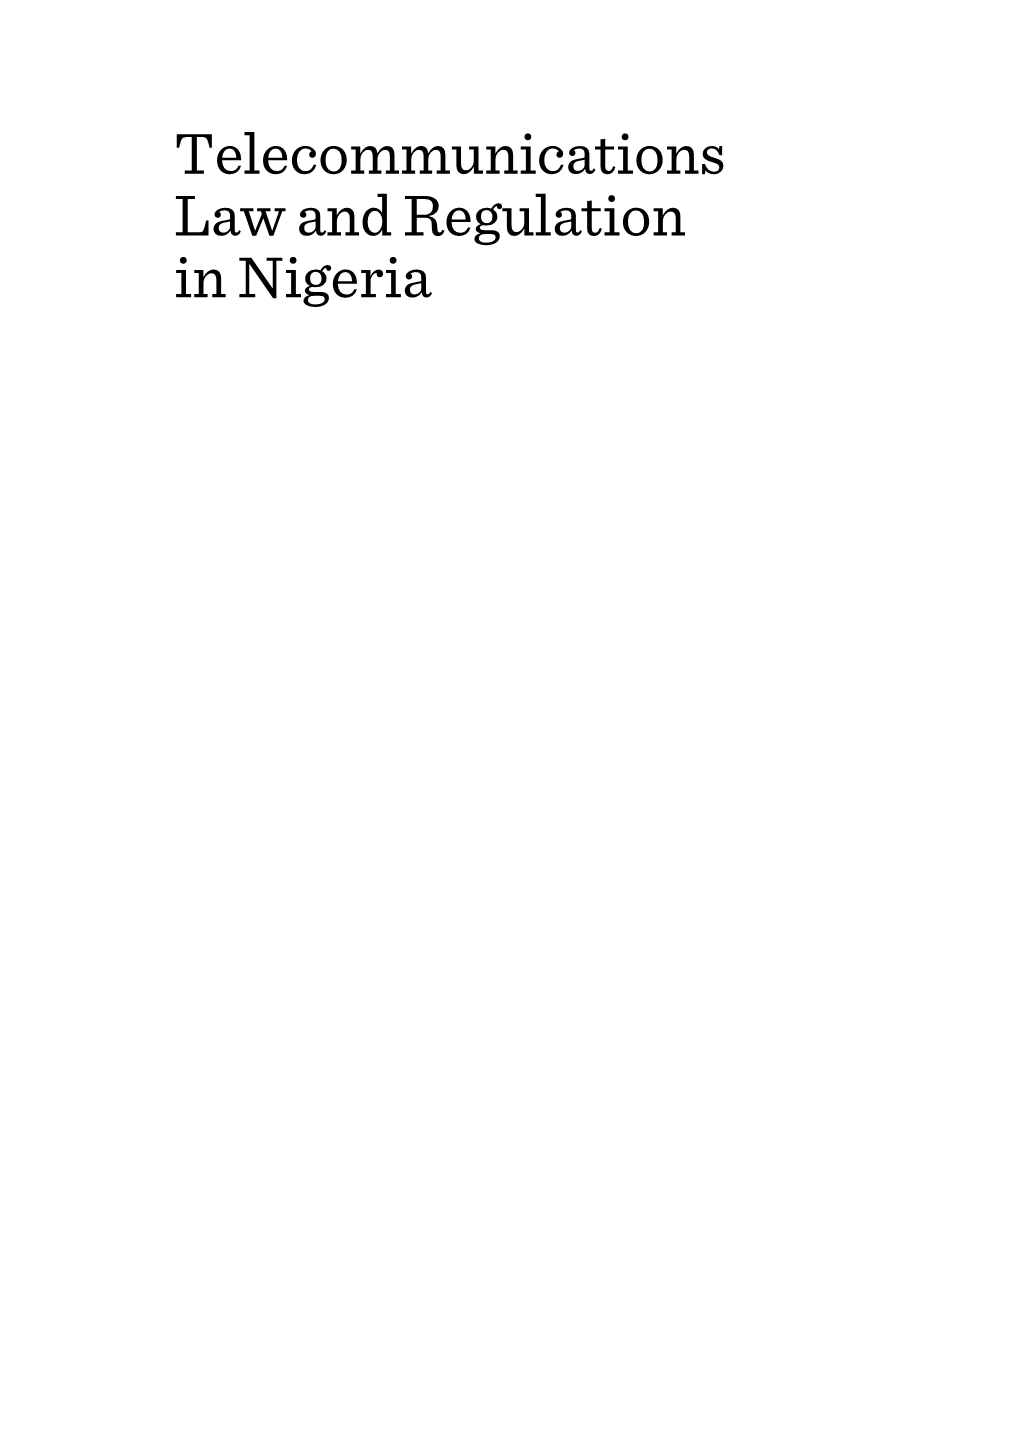 Telecommunications Law and Regulation in Nigeria